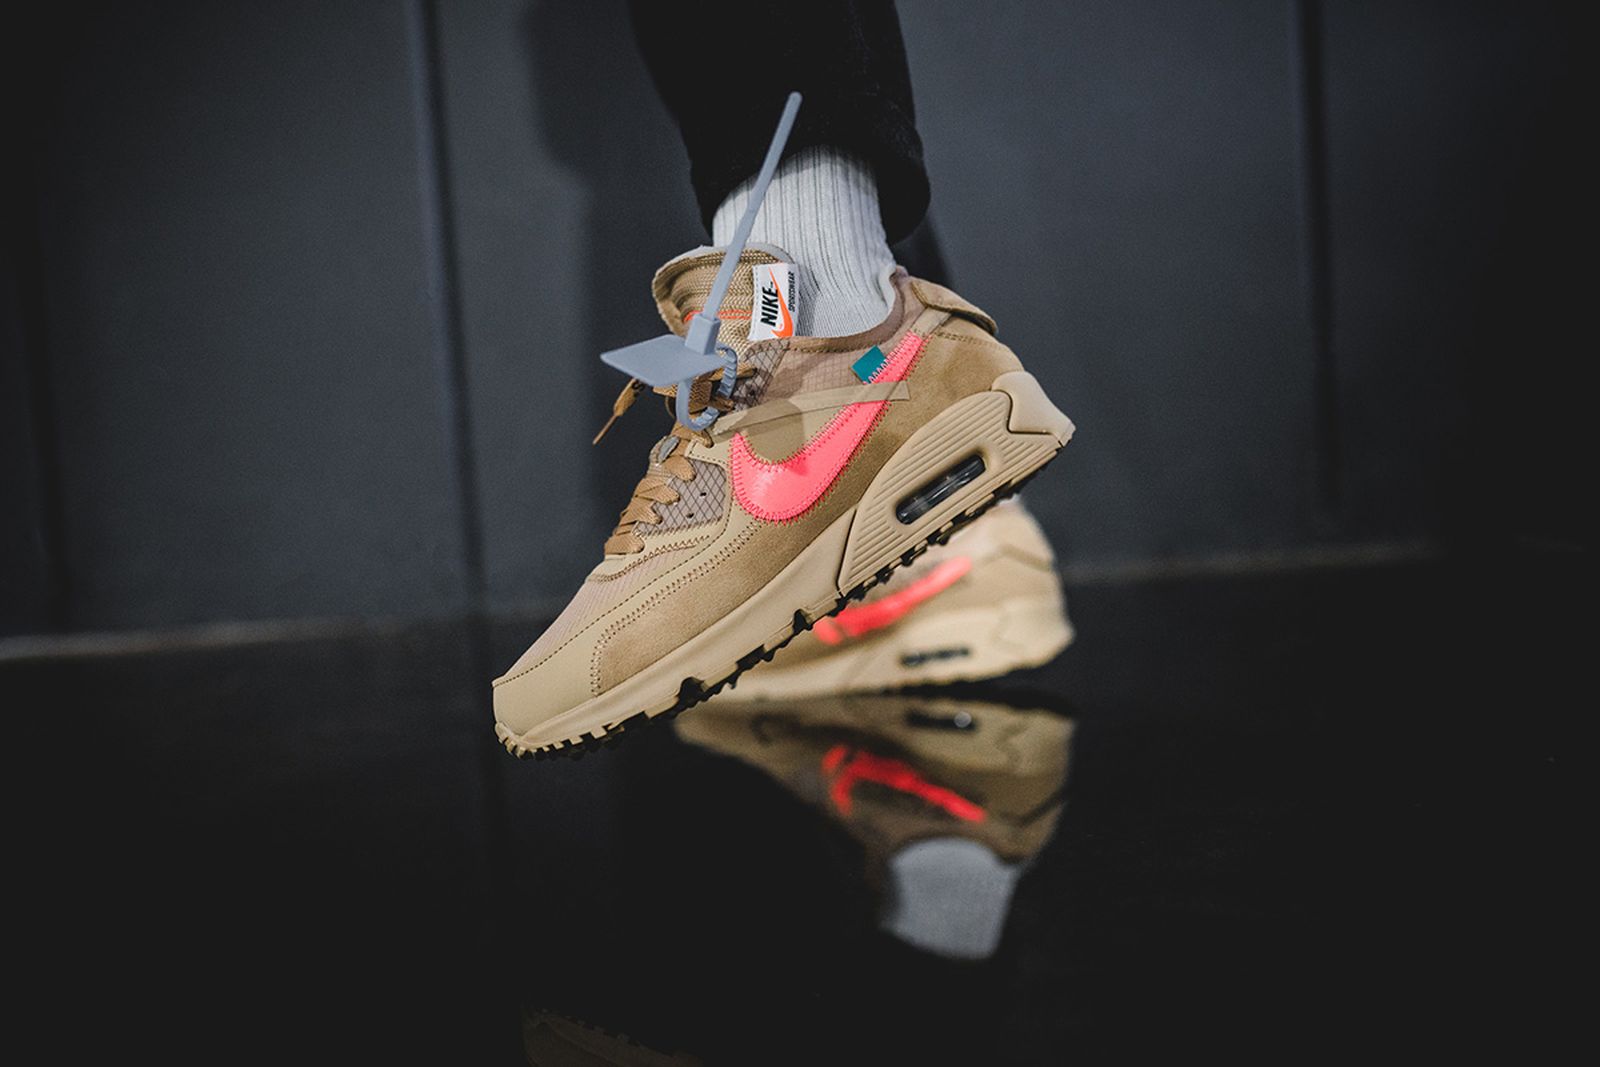 OFF-WHITE Nike Air Max 90 2019: Where to Buy Today